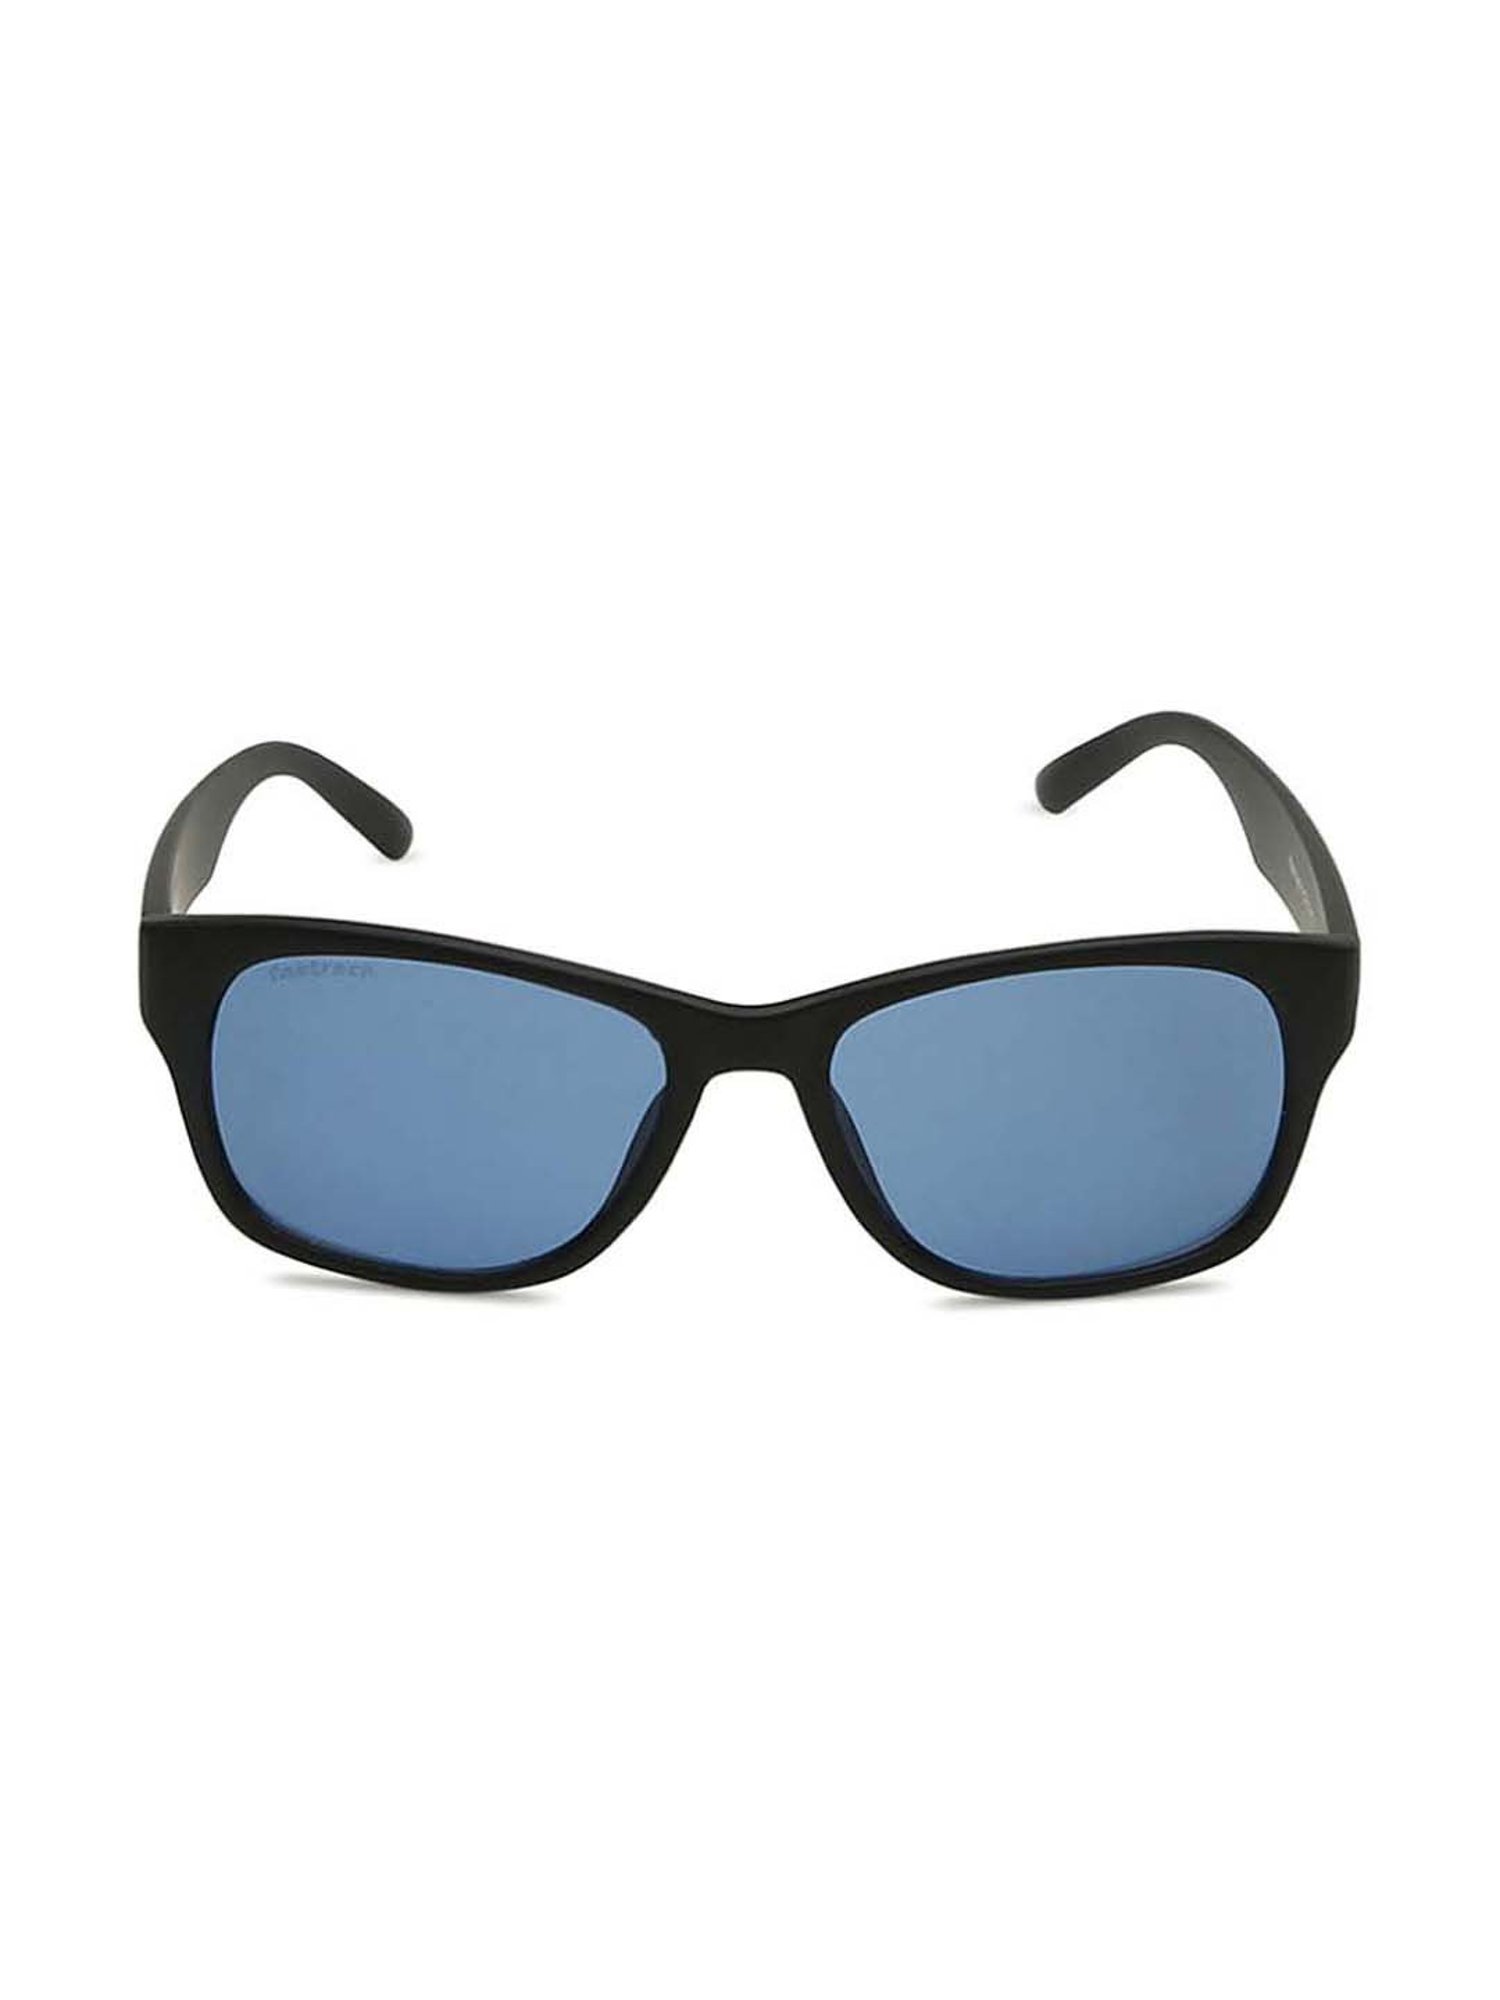 Designer UV400 Best Mens Sunglasses 2022 For Women And Men Classic Fastrack  Style With Options For Beach And Outdoor Activities From Aimeishopping,  $7.19 | DHgate.Com